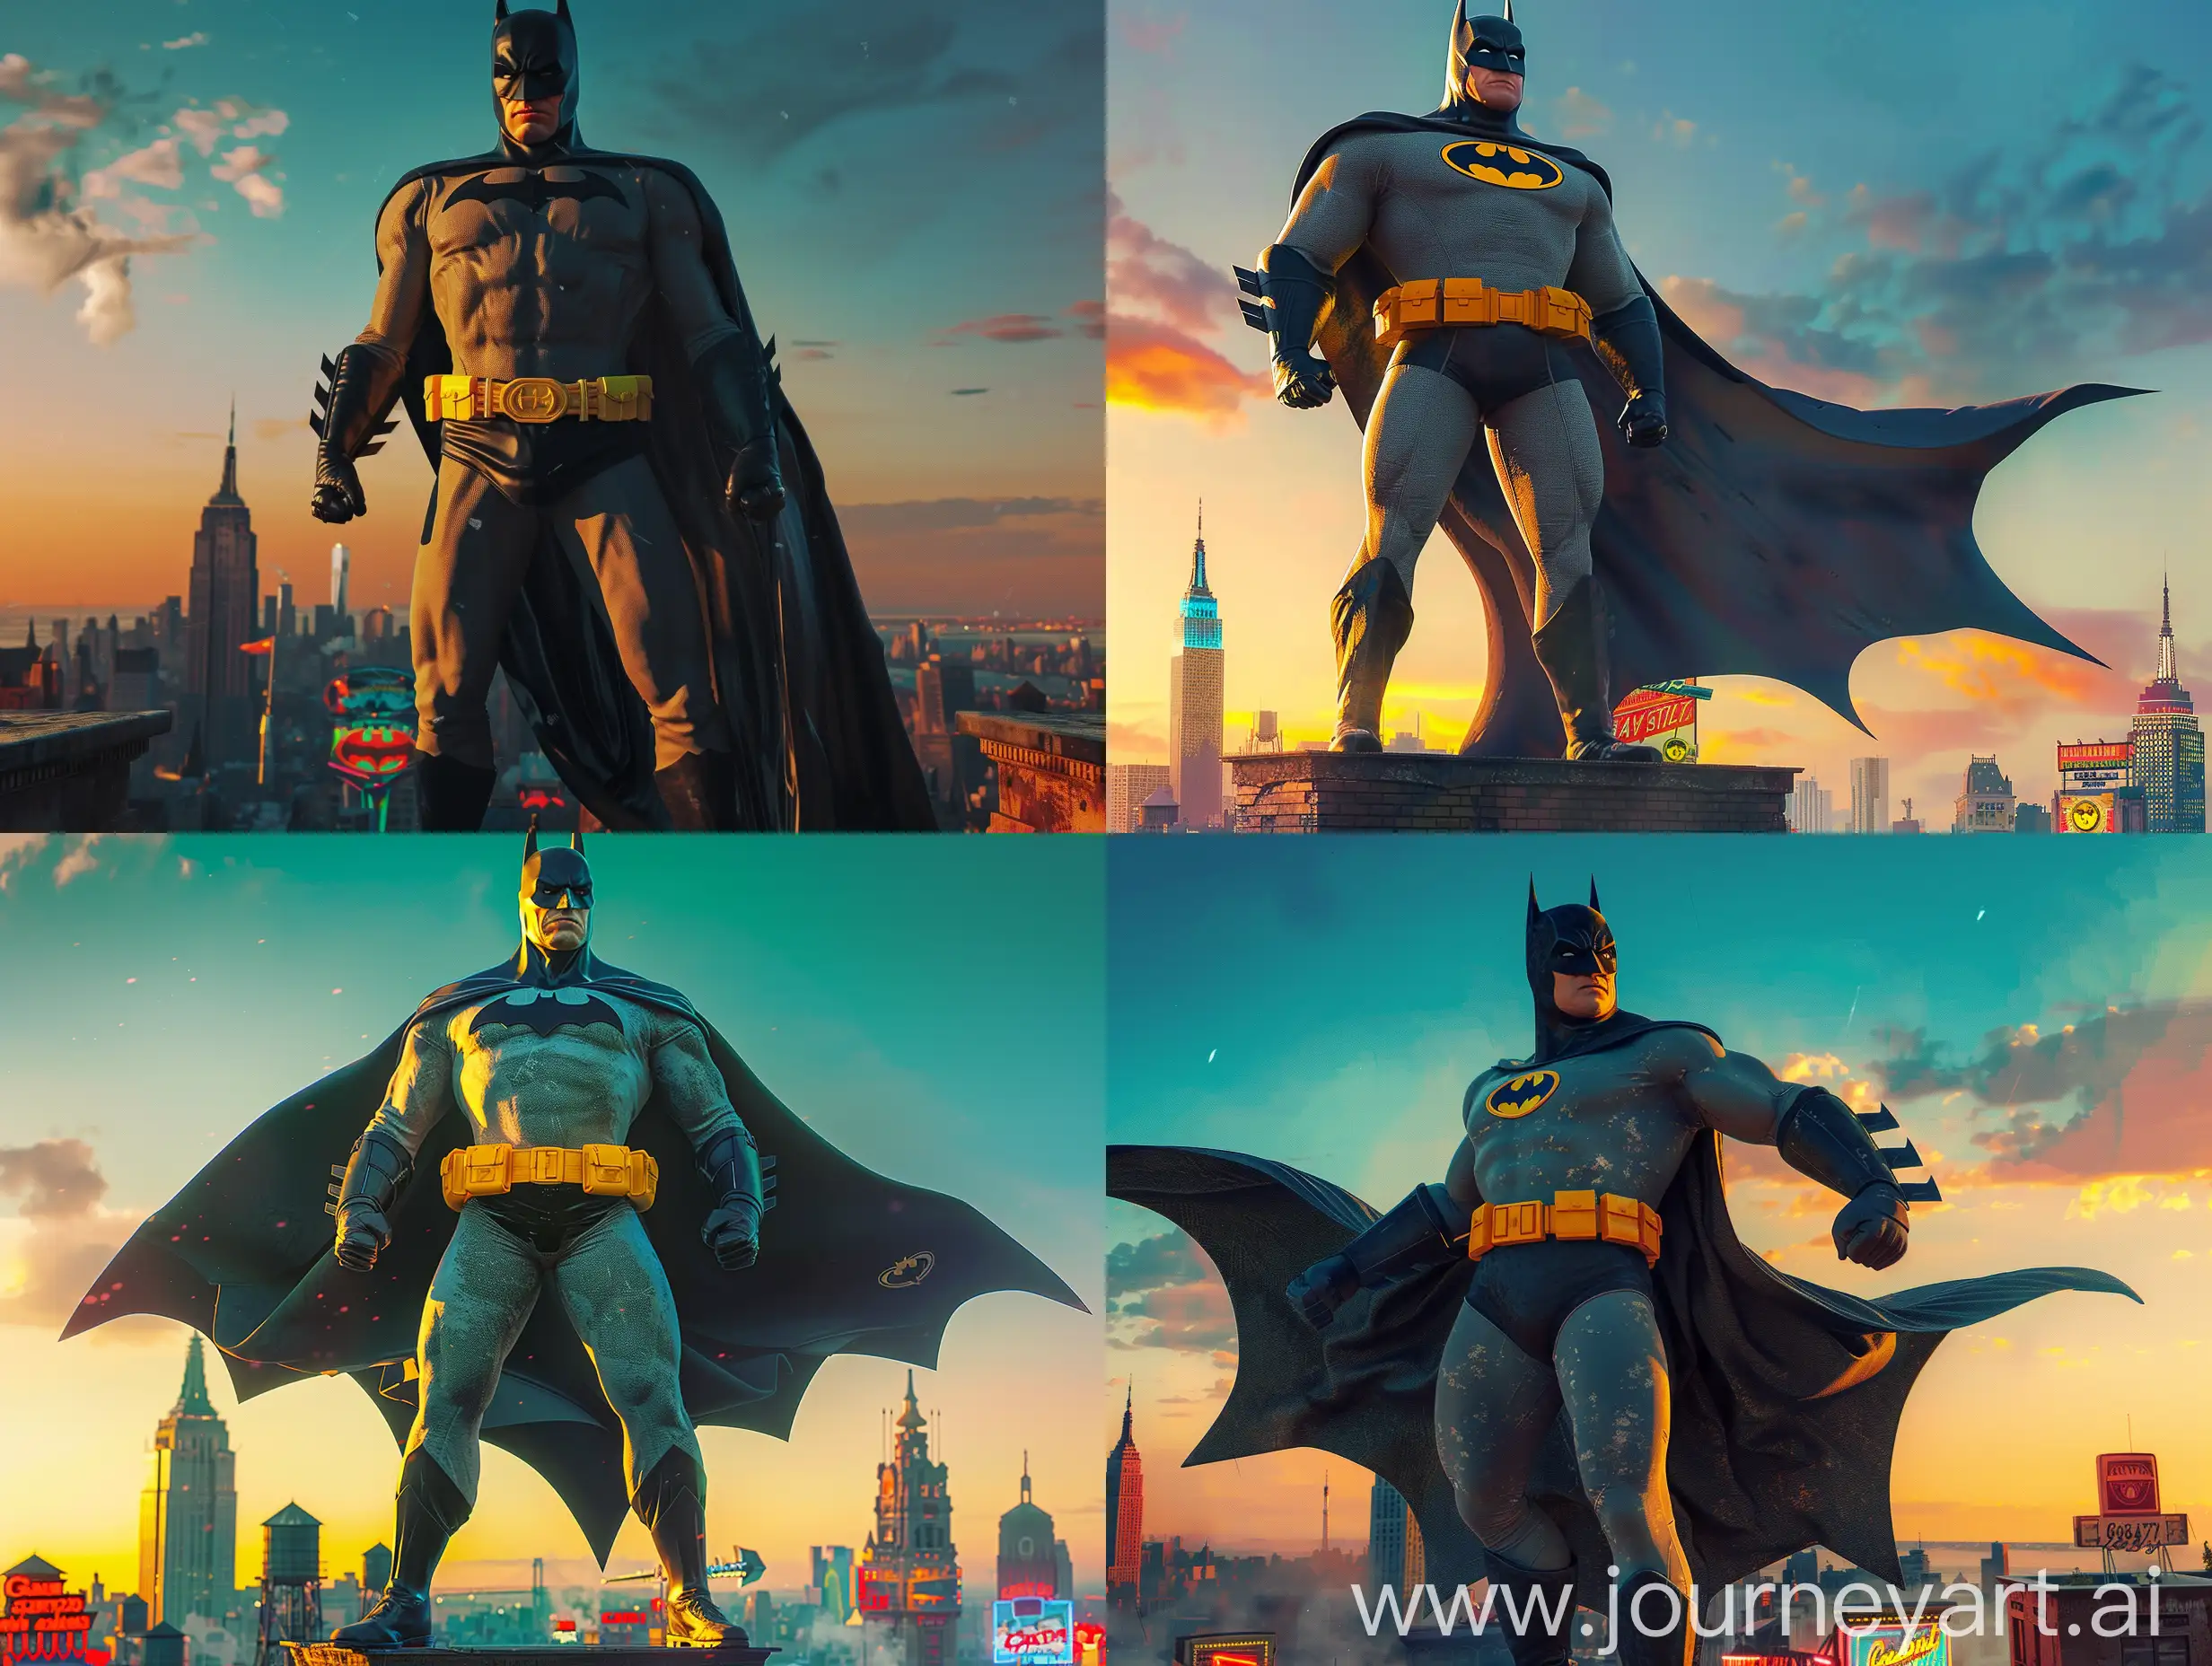 Create an image of Batman standing heroically on a Gotham City rooftop at sunset, with a vibrant, healthy, and colorful palette reminiscent of 1950s cinema. Incorporate the aesthetic of 70's Super Panavision, with a wide-angle composition and a shallow depth of field. Batman's costume should be inspired by the 1950s comic book era, with a bold, bright yellow utility belt and a cape that flows dramatically in the wind. The sky behind him should be a warm, gradient blue, with a few wispy clouds. The cityscape below should be a mix of art deco and gothic architecture, with neon signs and billboards adding a pop of color. Batman's facial expression should be confident and determined, with a hint of a smile. The overall mood should be one of optimism and heroism, capturing the essence of the 1950s Batman.* "Cinemascope aspect ratio"
* "Warm color grading"
* "Film grain texture"
* "Retro-futuristic cityscape"
* "Dynamic lighting"
* "Heroic pose"